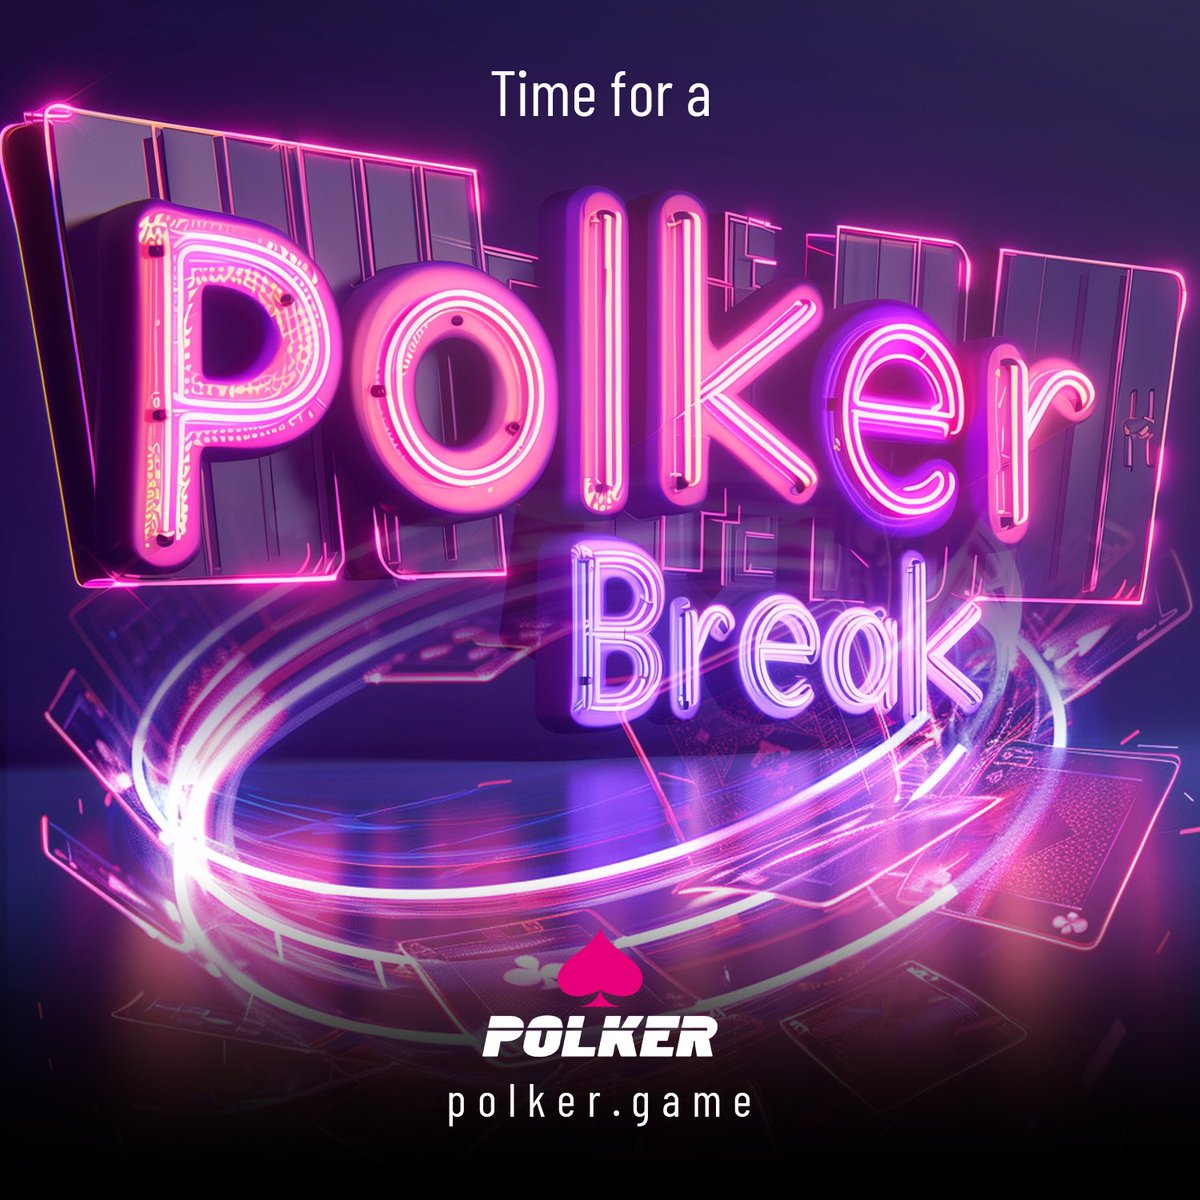 It’s one day until the weekend but it’s never too early for a Polker break! 🥹 So go ahead and play a few hands! A well-deserved break can give you all the boost you need to make it through a long week! 😎 #gamefi #playtoearn #poker